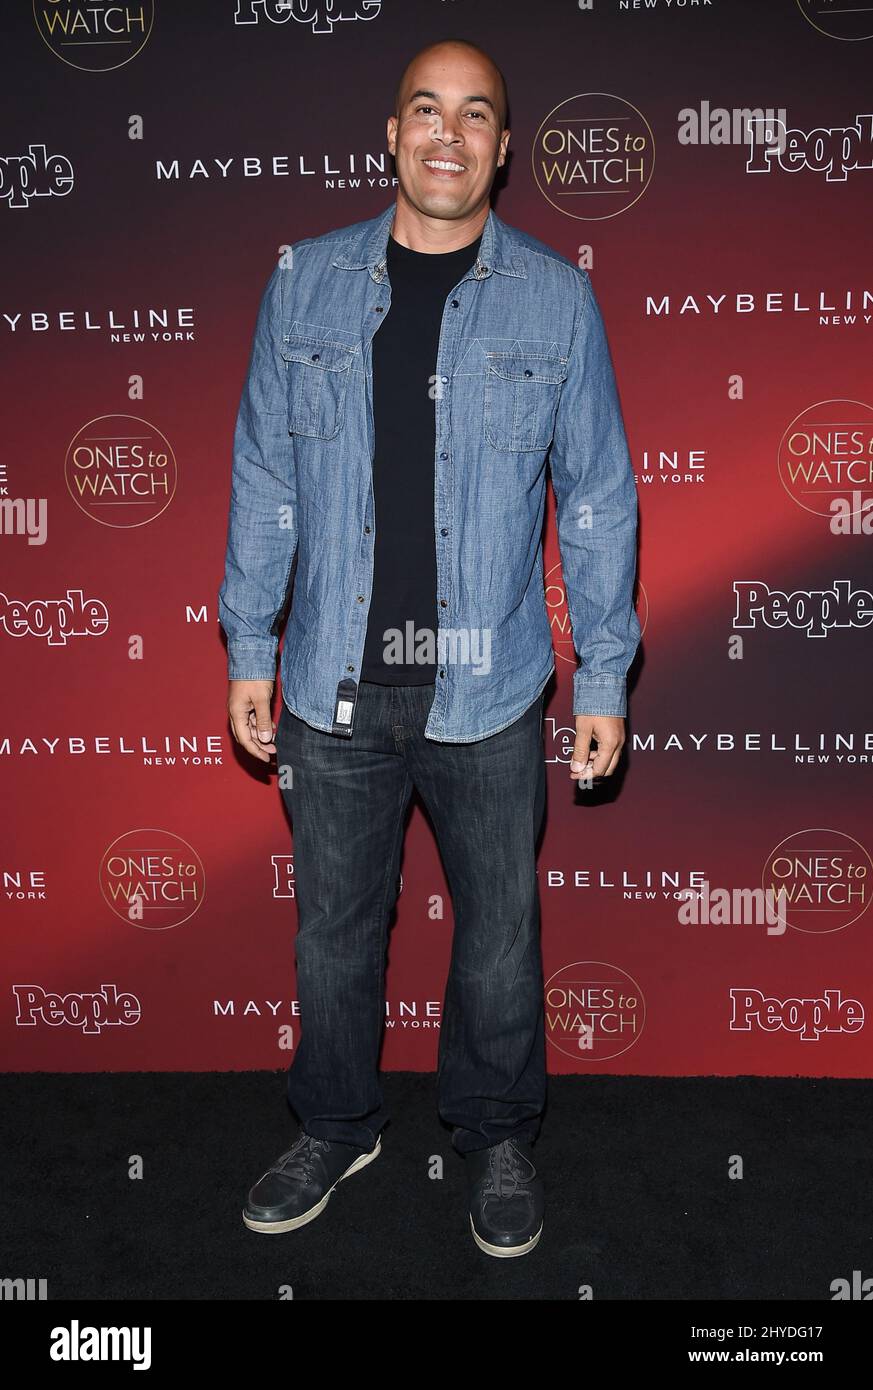 Coby Bell attending the People's 'One's To Watch' Event held at the Neuehouse Stock Photo